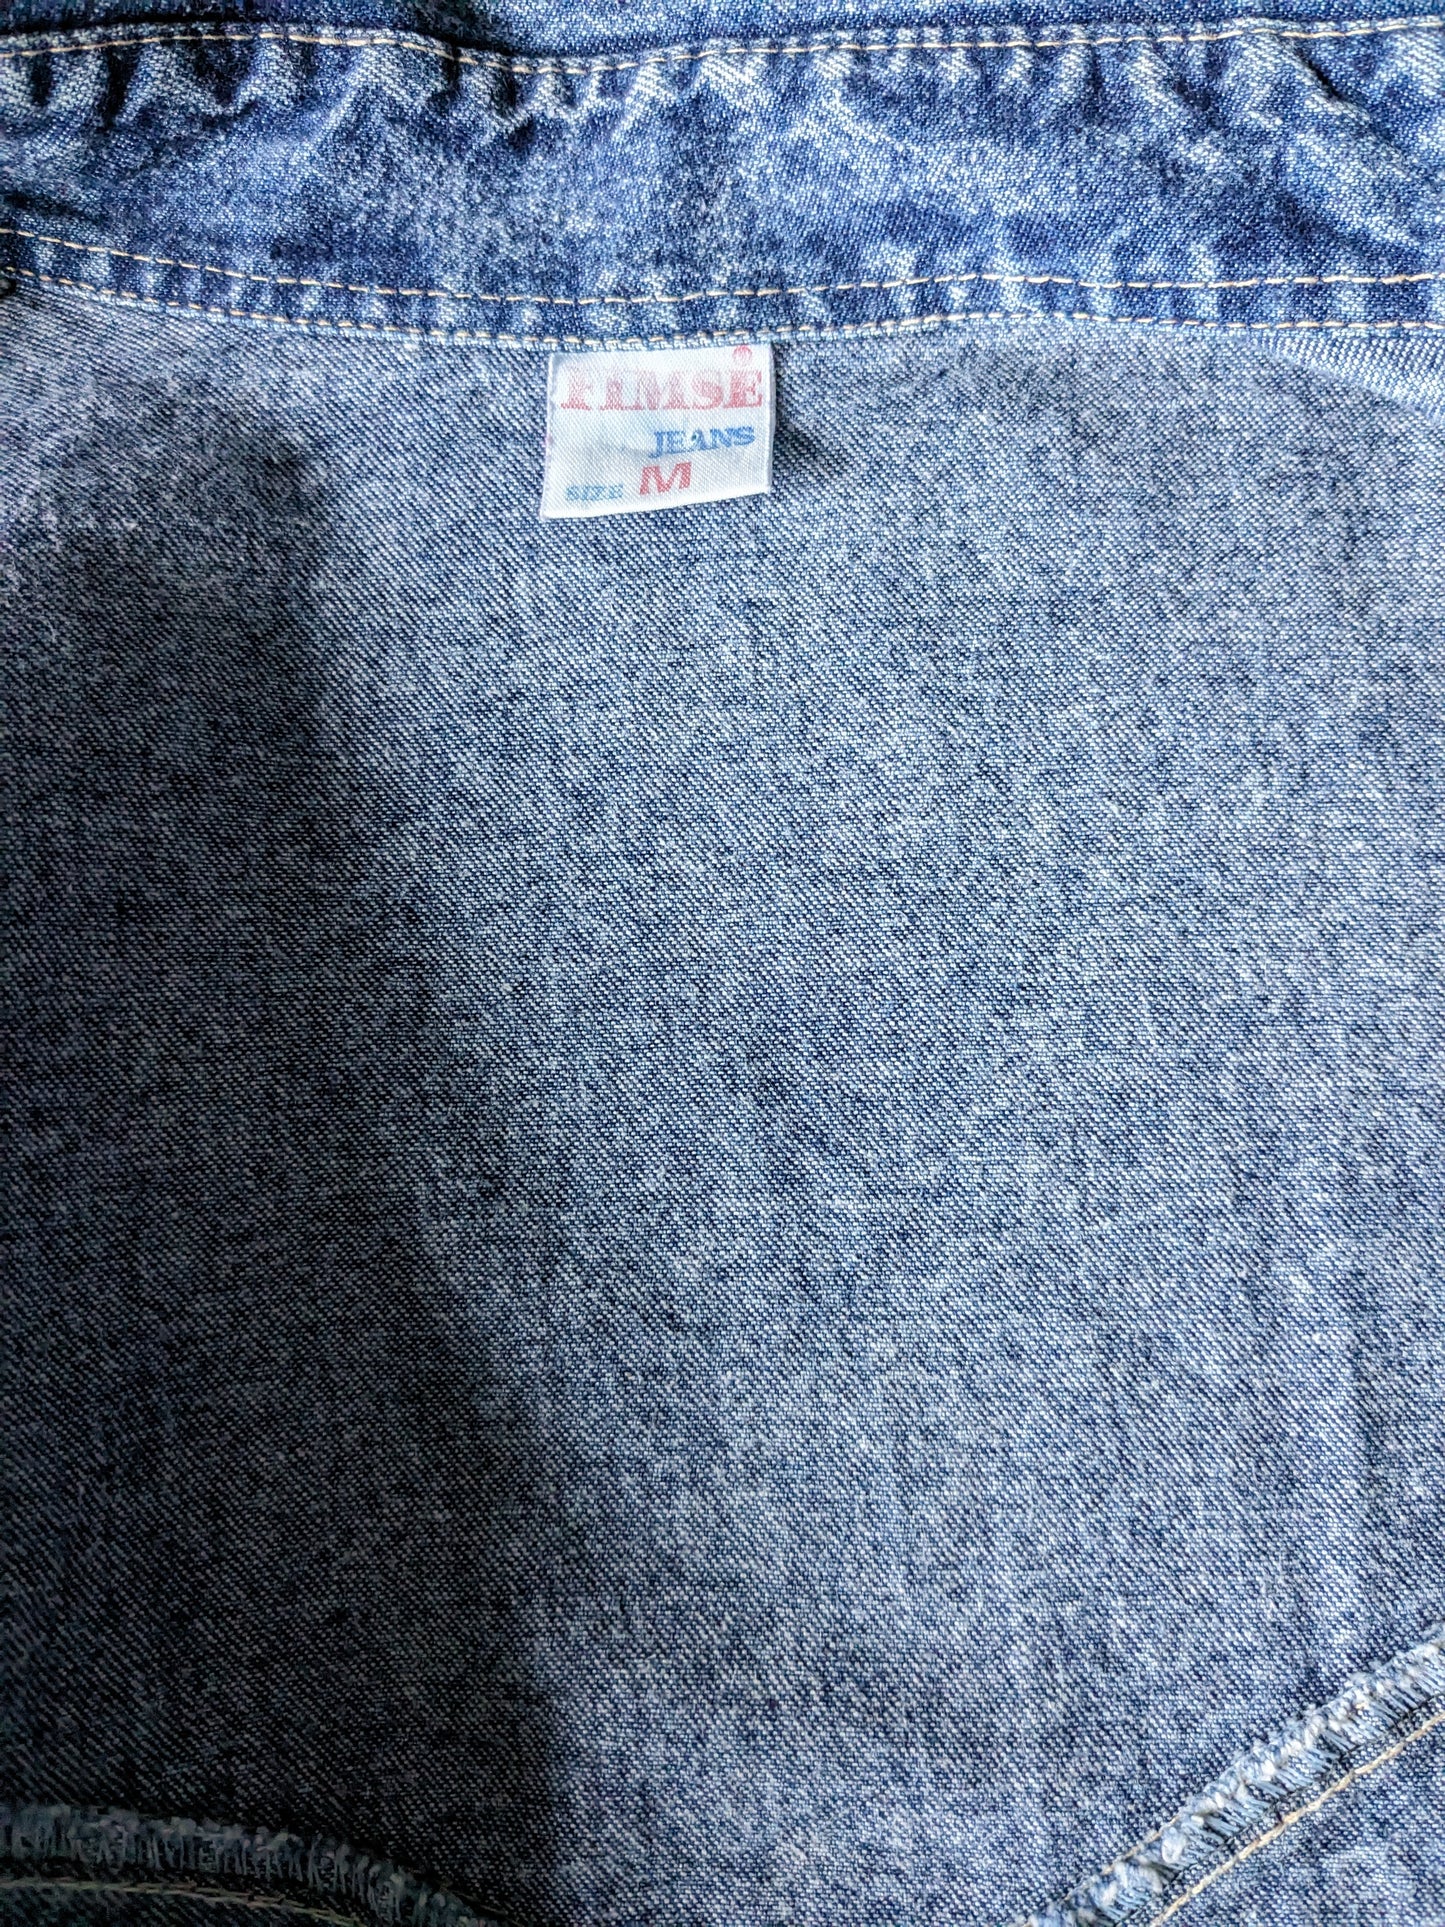 Vintage fimse jeans shirt thicker fabric. Blue mixed. Size L.